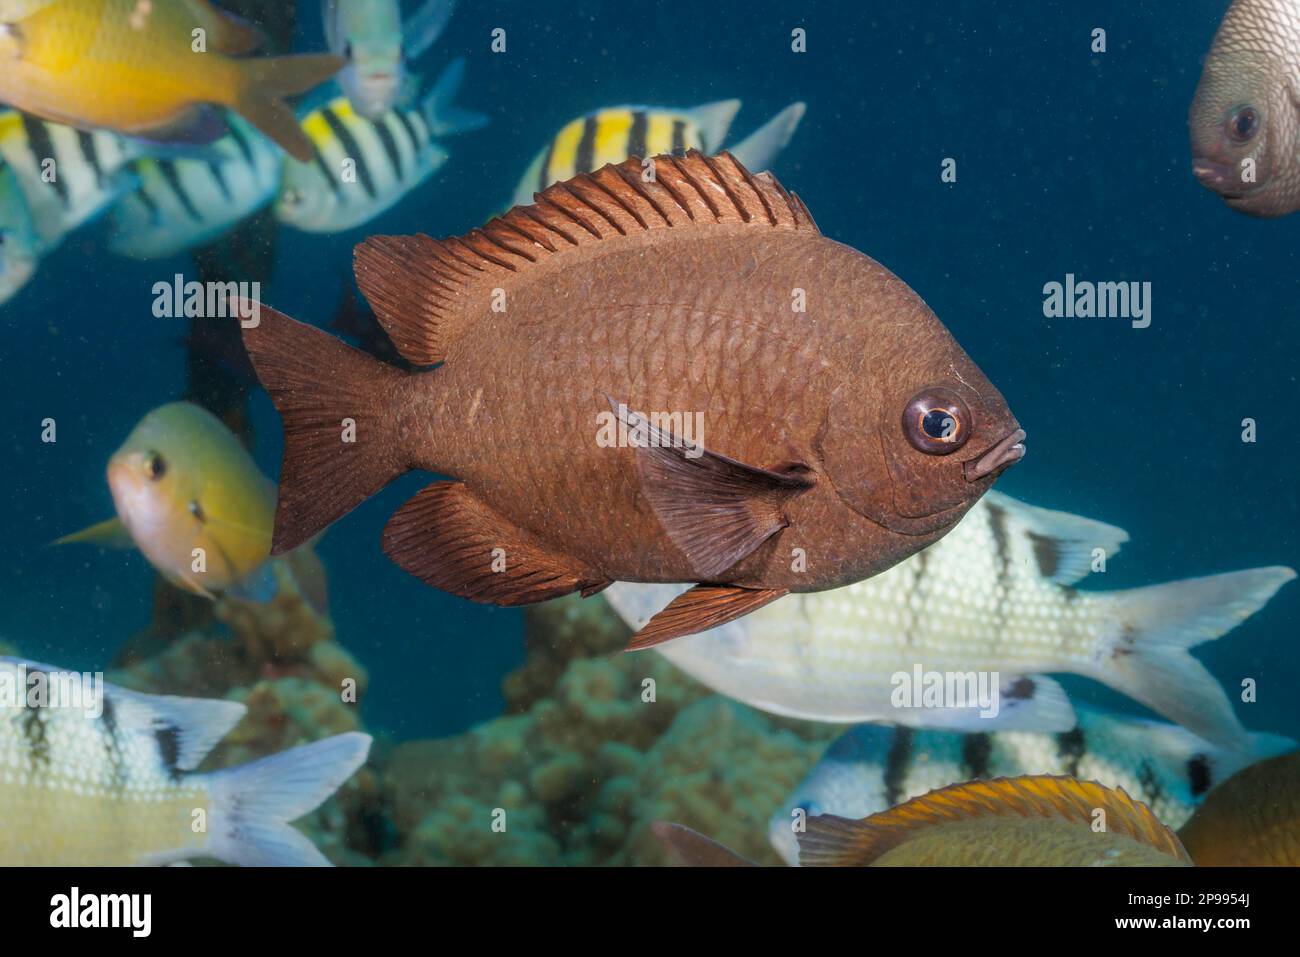 The threespot chromis, Chromis verater, is a member of the damselfish family. This species is endemic to the Hawaiian Islands. Stock Photo